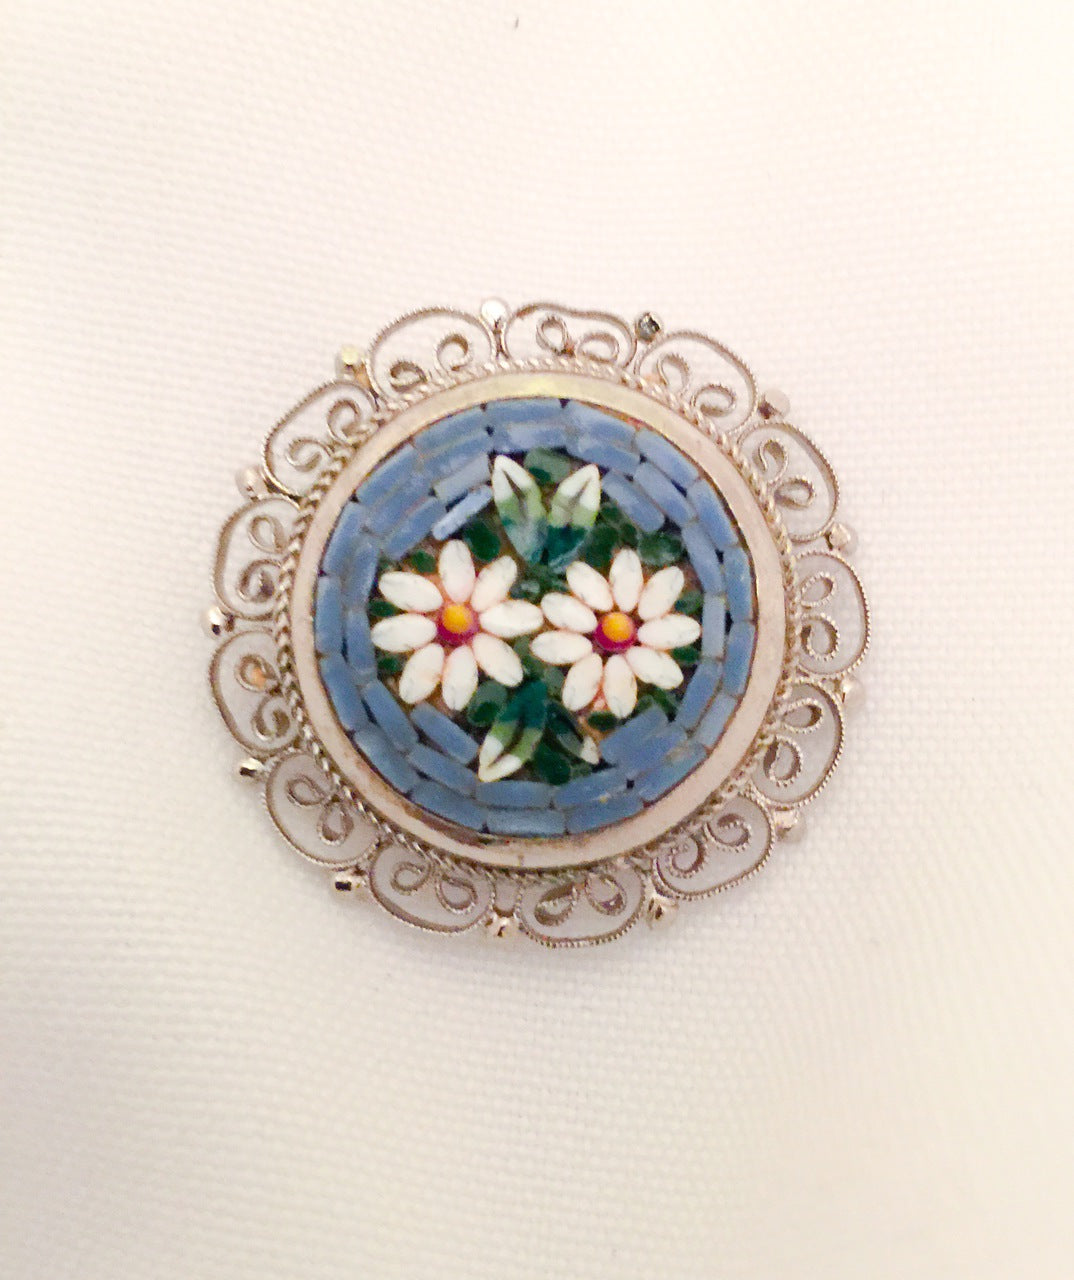 Vintage Venetian Circular Micro-Mosaic Pin with Flowers in a Light Blue Background